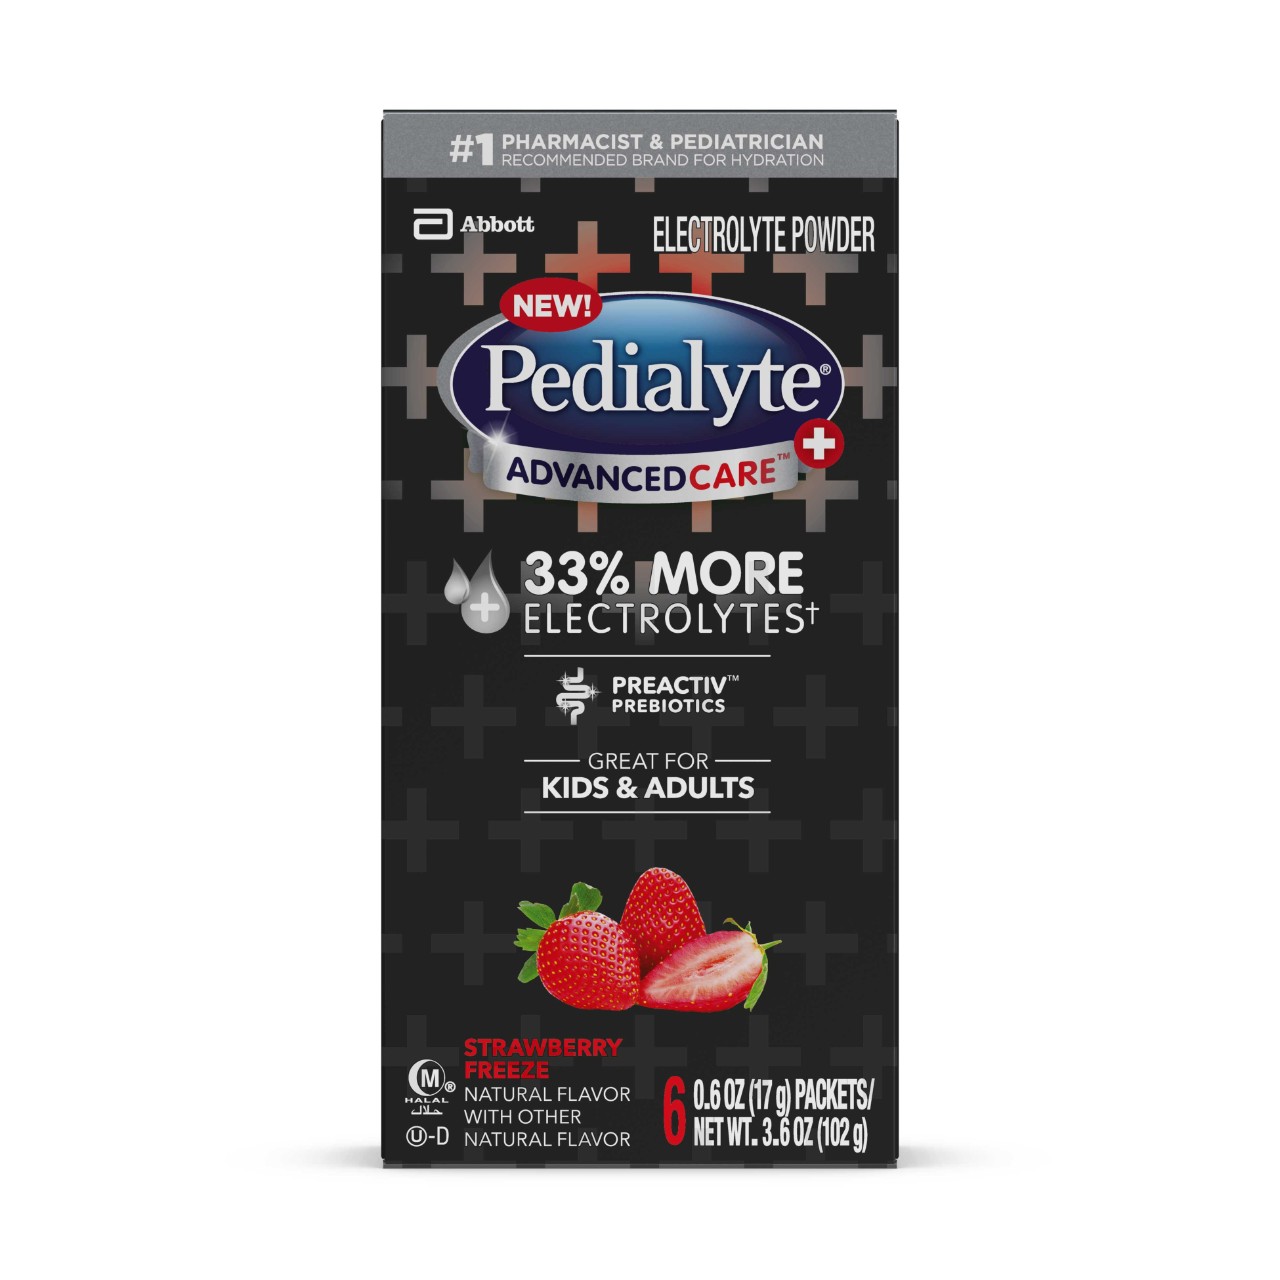 Advanced rehydration with 33% more electrolytes than classic Pedialyte to help you feel better fast.